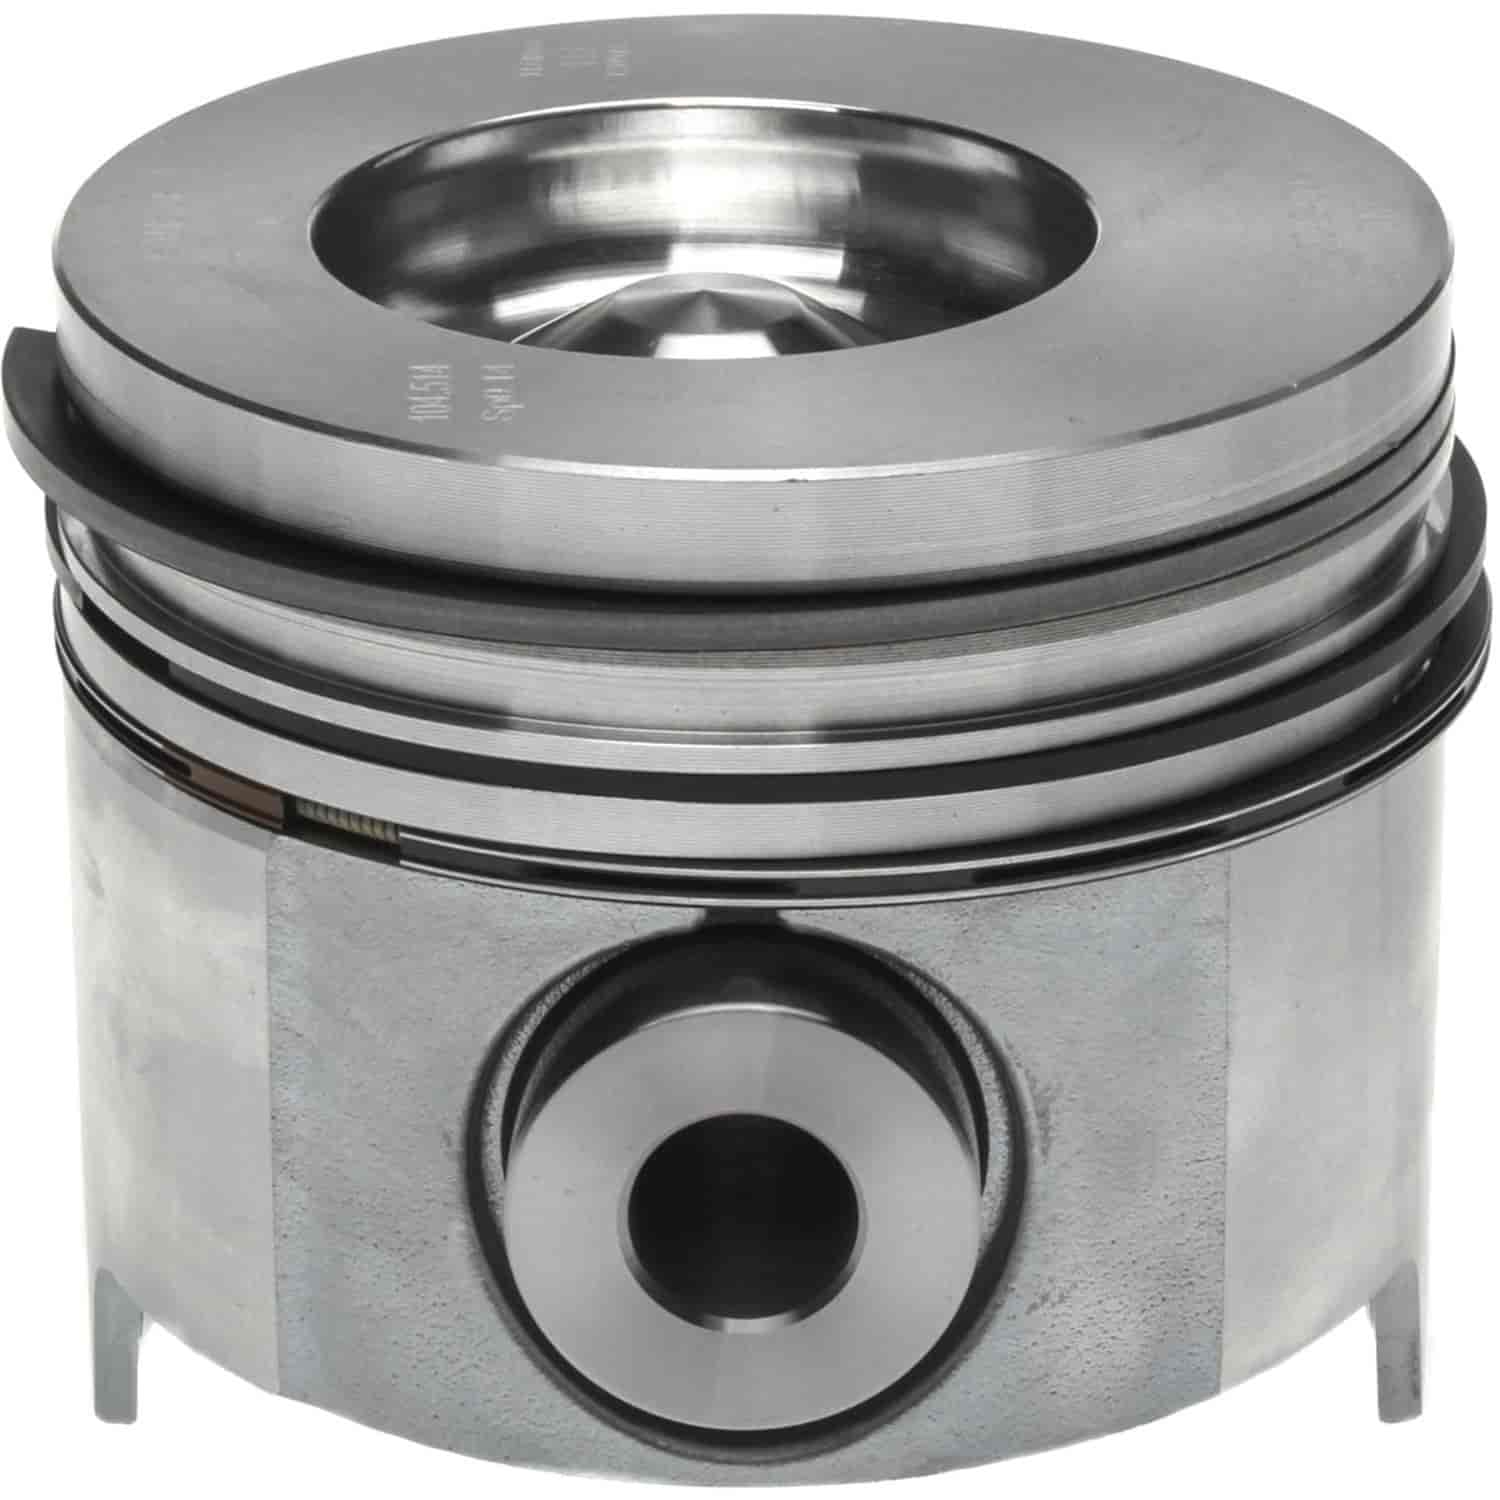 Piston and Rings Set 2001-2005 Chevy/GMC Duramax Diesel V8 6.6L Left Bank with 4.055" Bore (Standard)